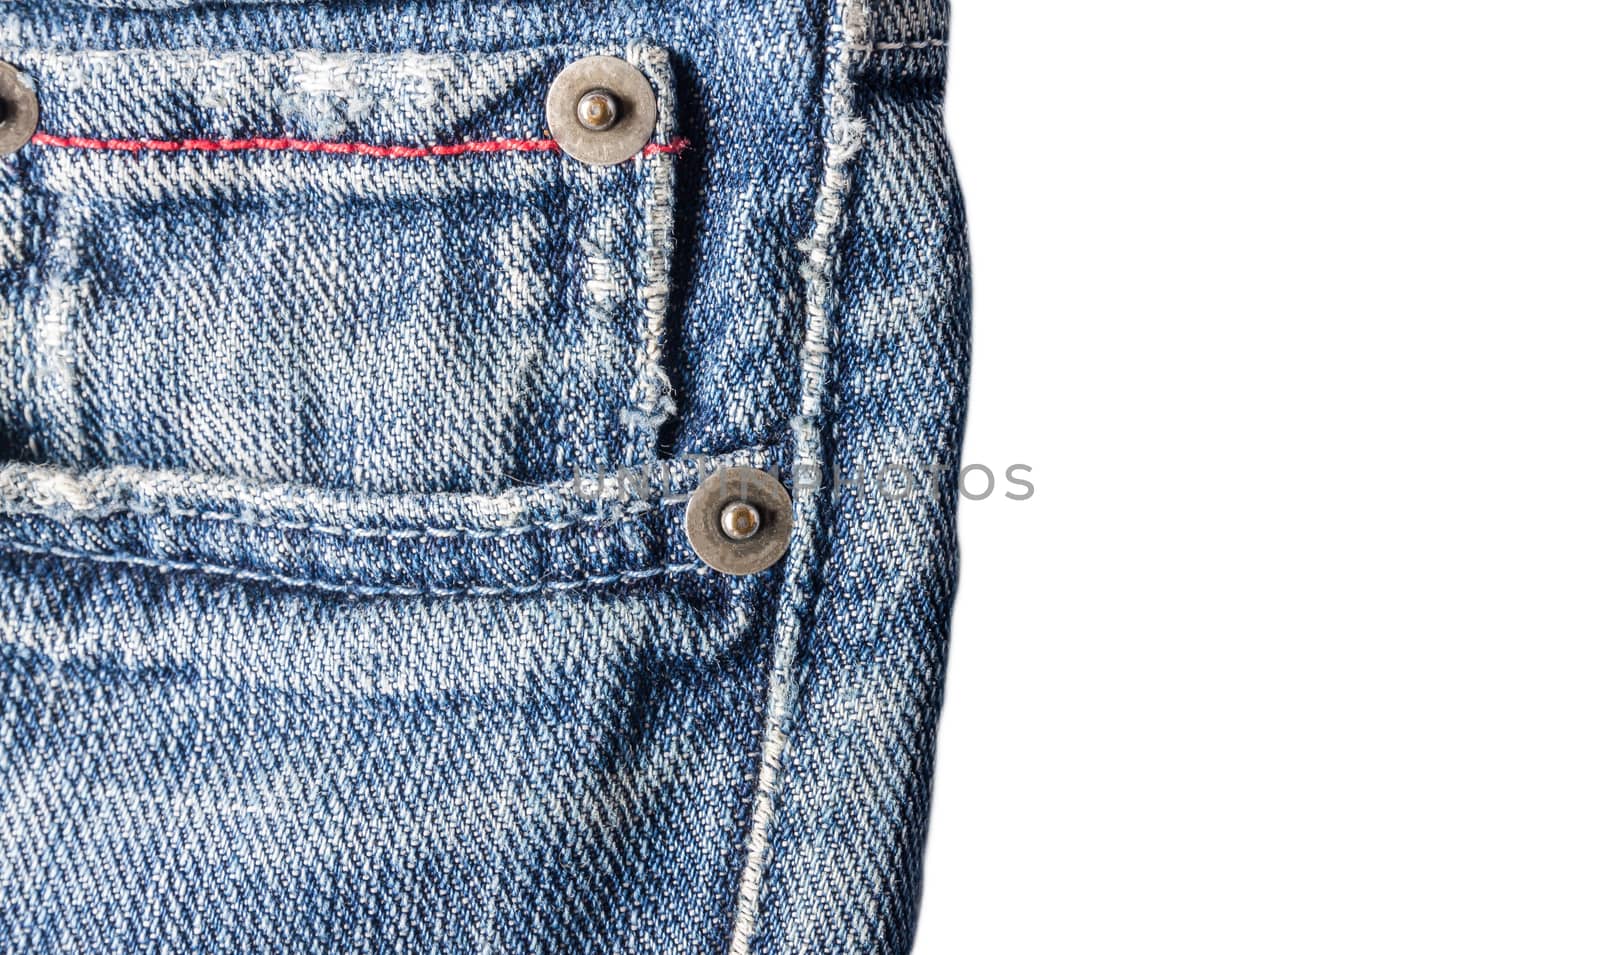 Jeans close-up, old, pocket back, front, crumpled, torn.Isolated on white background.